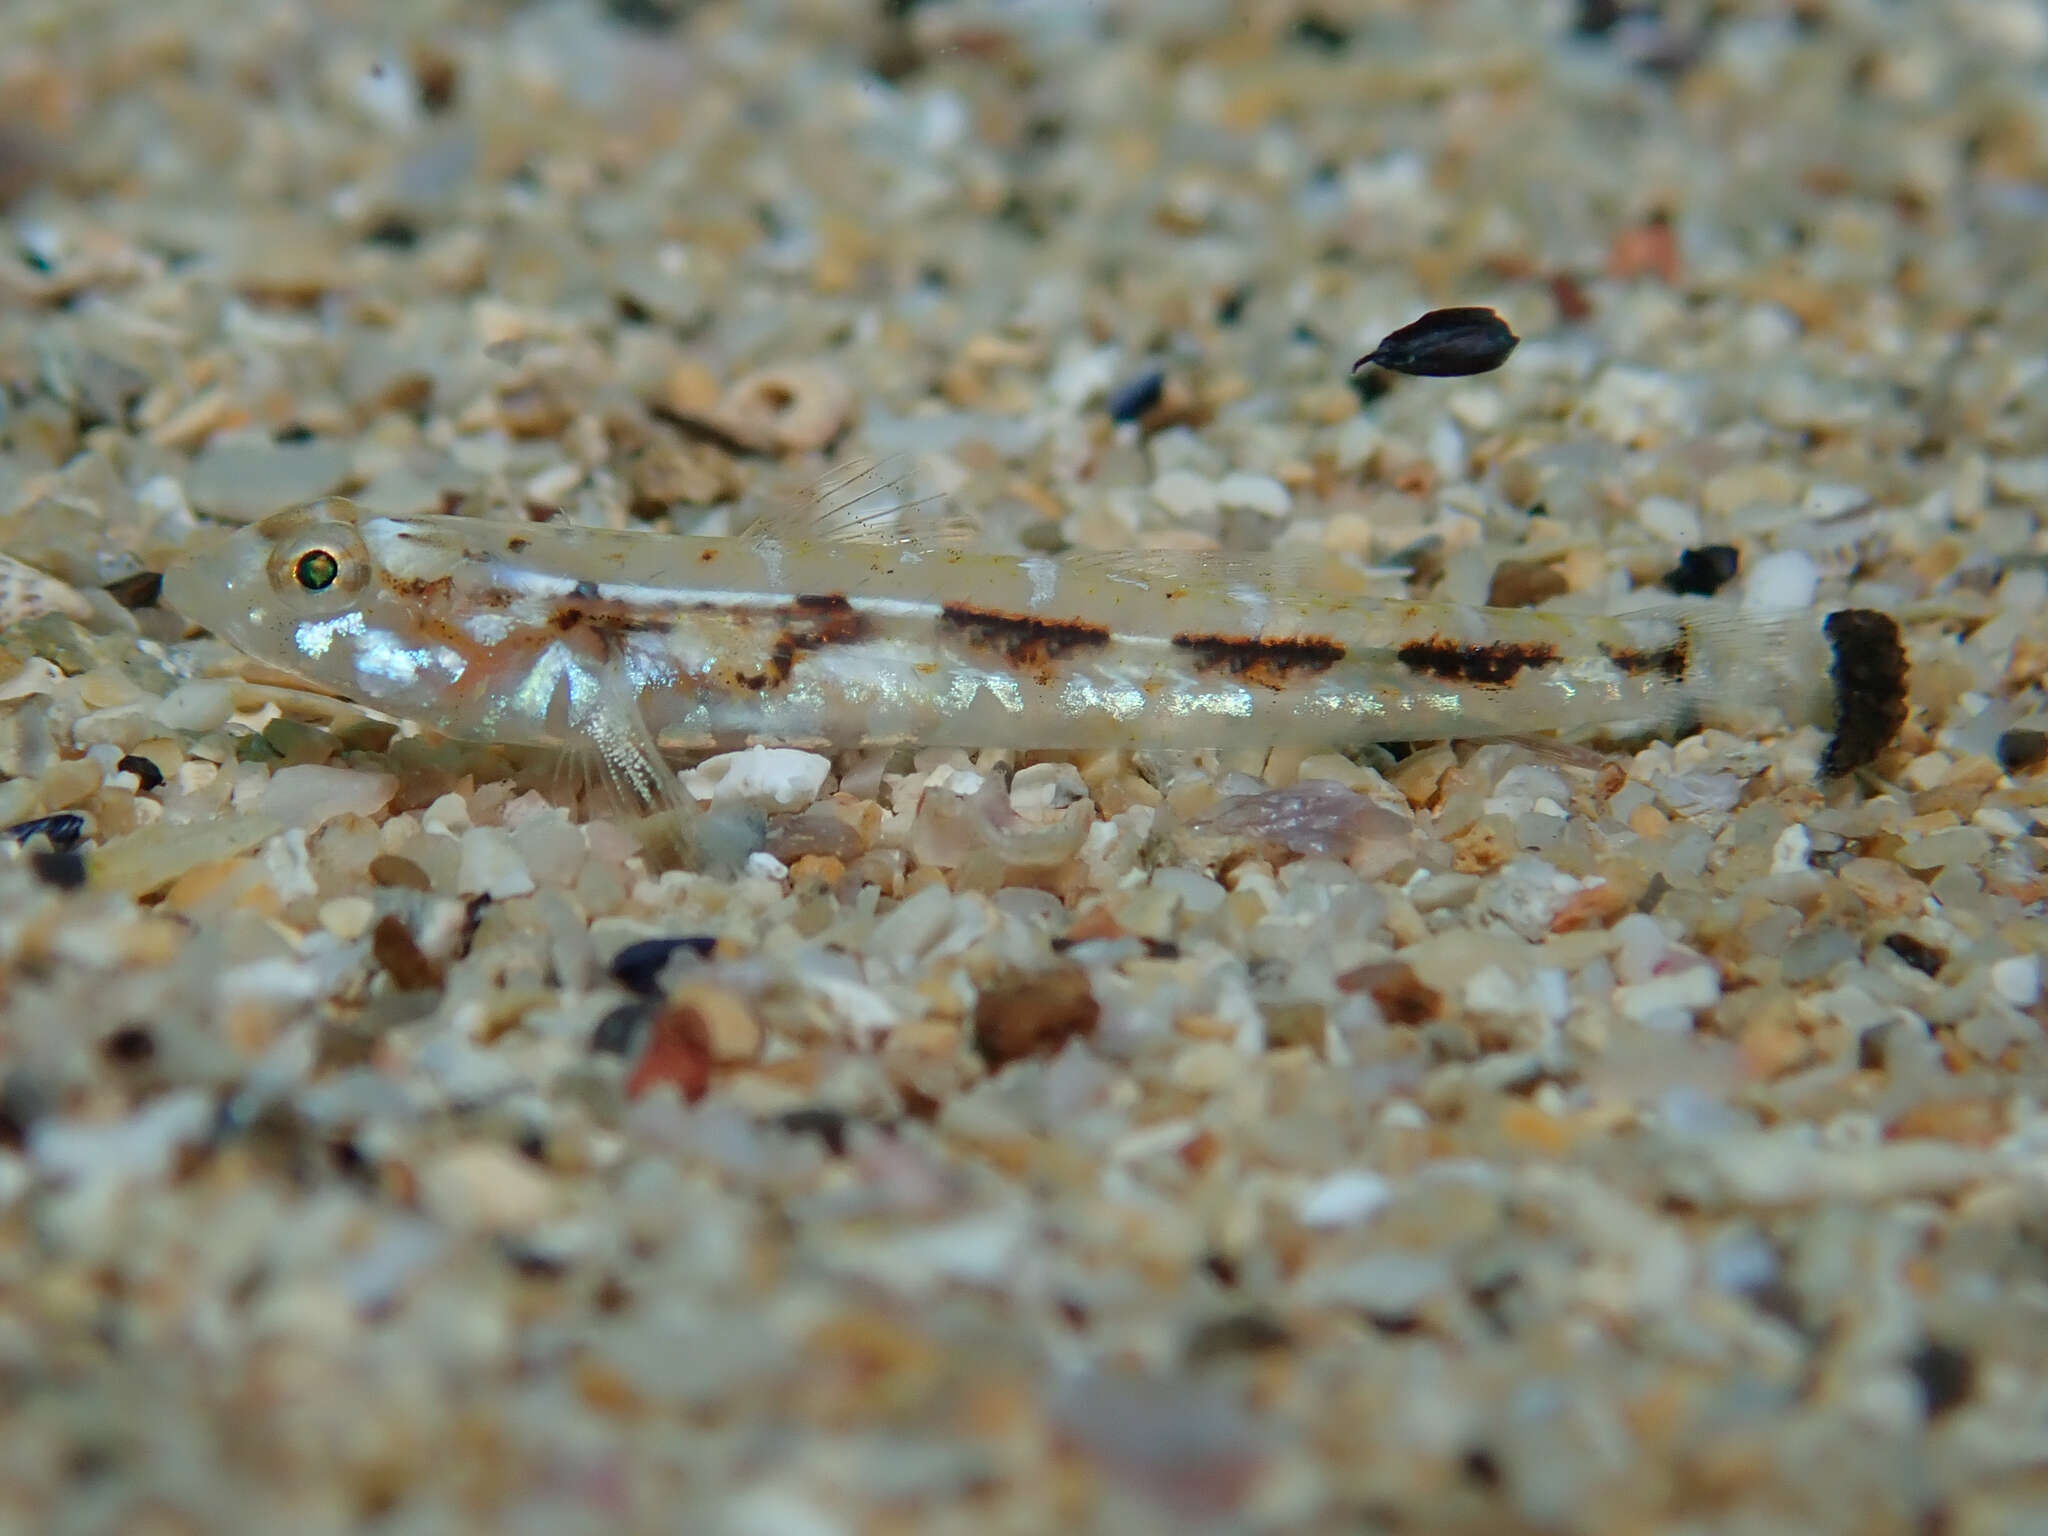 Image of Bath's goby